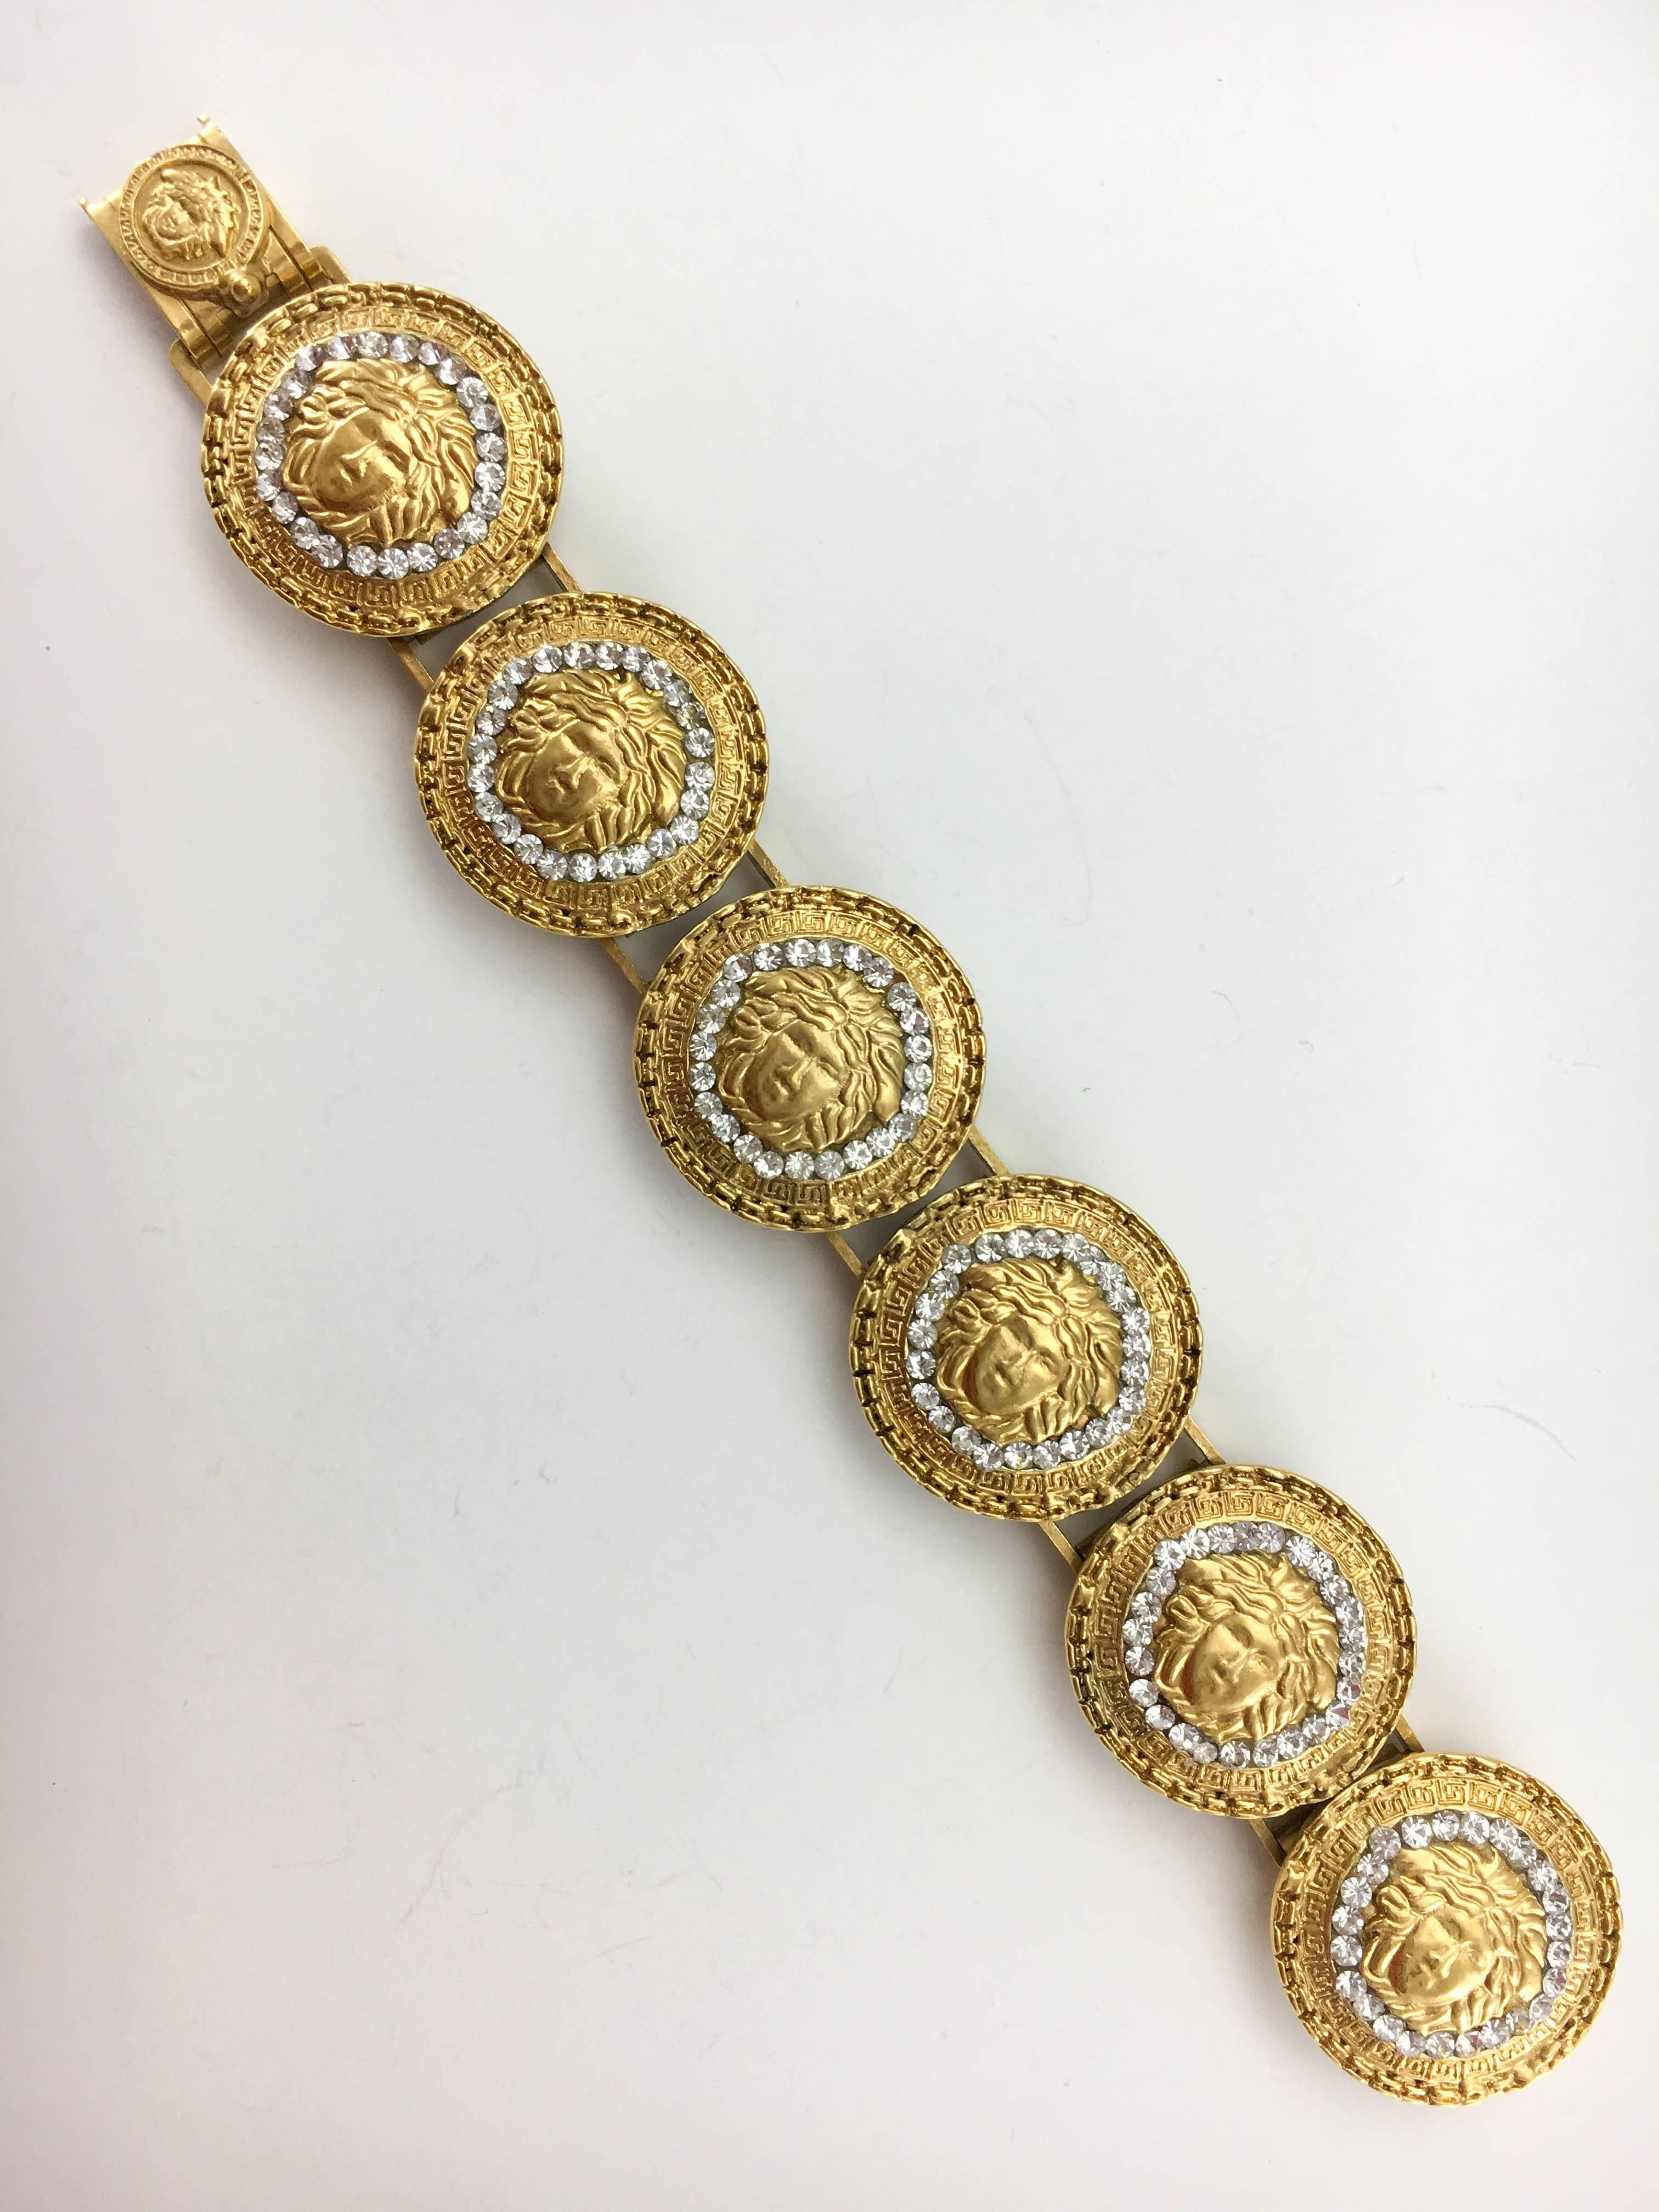 1990's Gianni Versace Gold-Plated Medusa Head with Rhinestones Bracelet In Excellent Condition For Sale In London, Chelsea